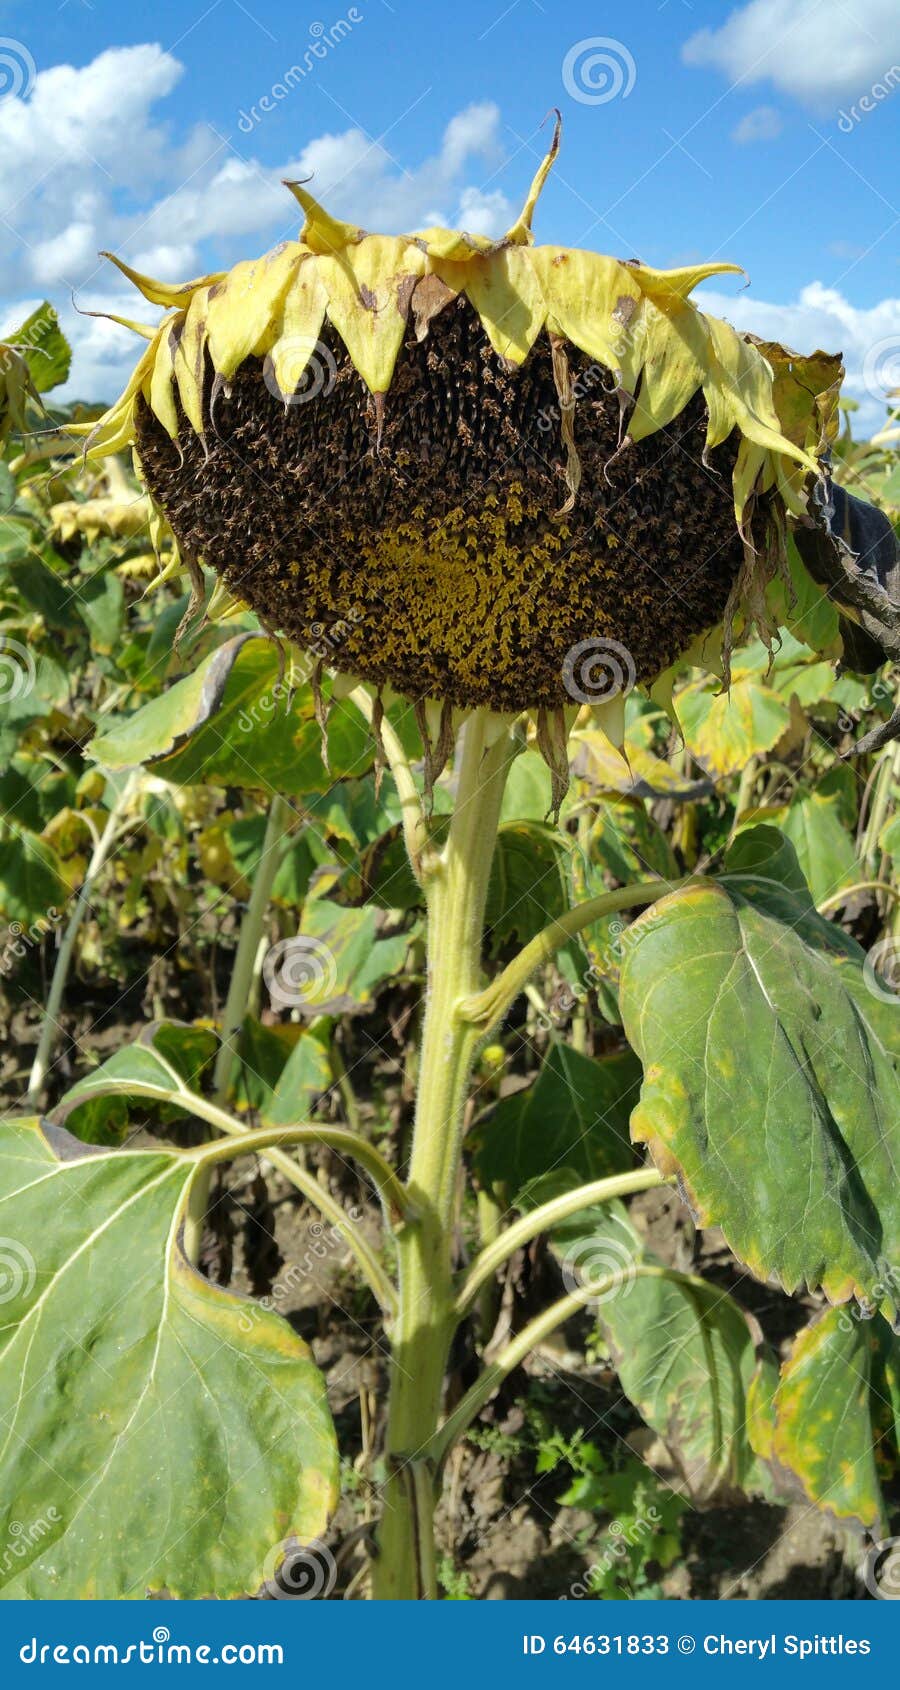 166 Bent Sunflower Stock Photos - Free & Royalty-Free Stock Photos from ...